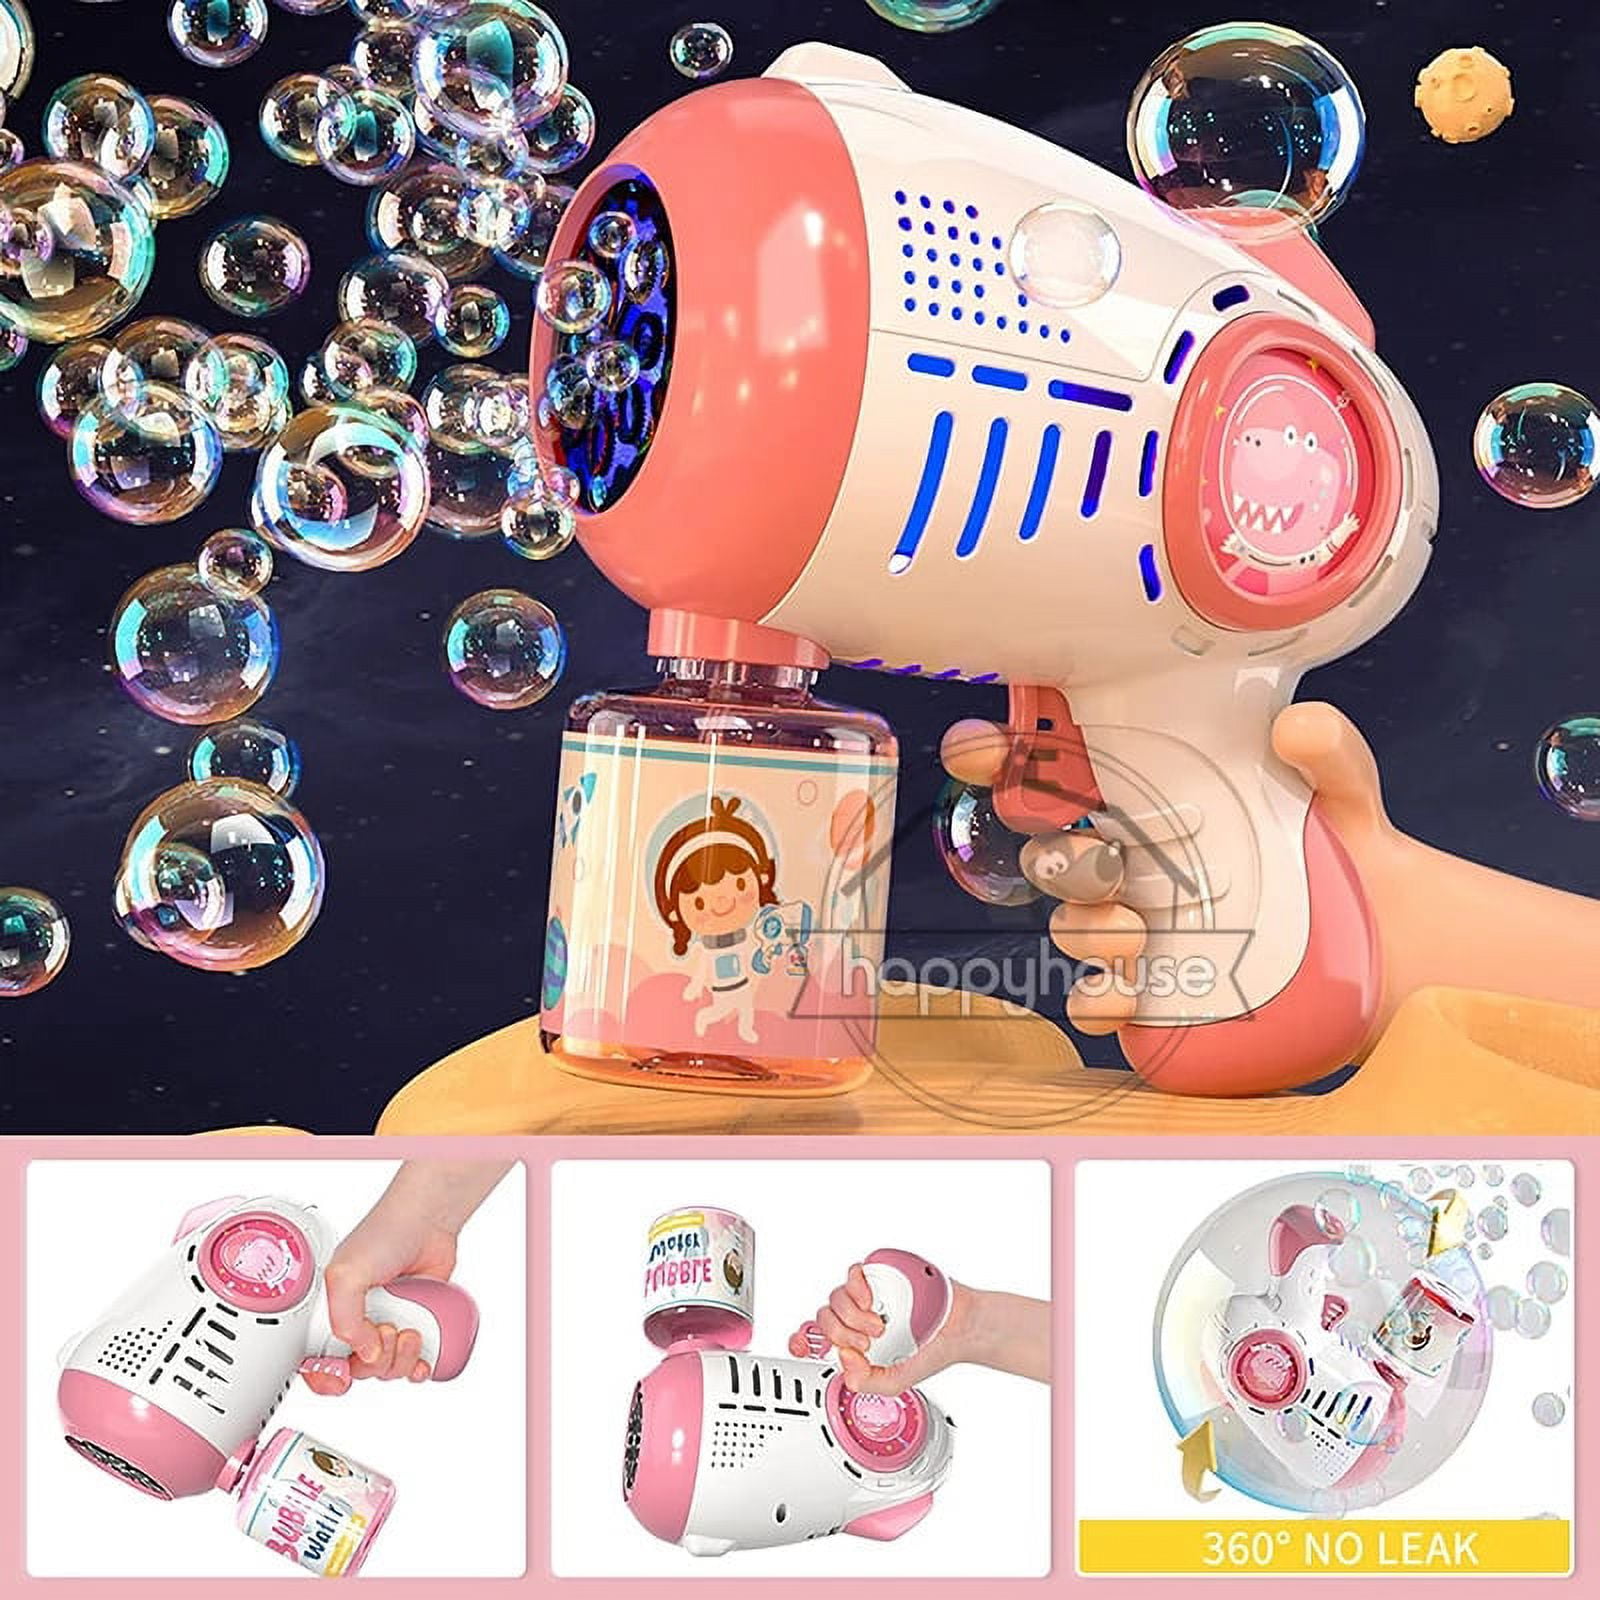  VERSDITAS Automatic Gatling Bubble Gun,That Produces Thousands  of Bubbles per Minute, Suitable for Children and Adults and Perfect for  Indoor and Outdoor Birthday Parties for Girl Boy : Toys & Games